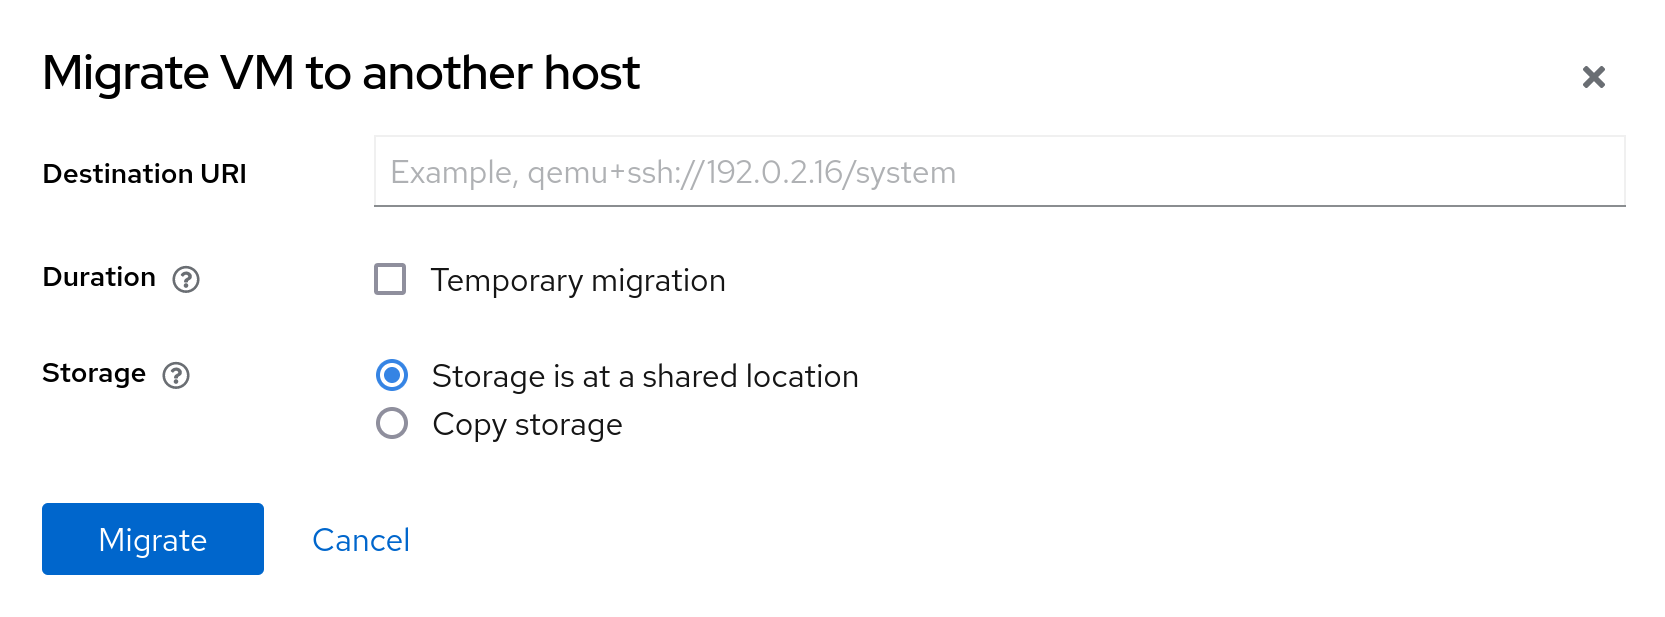 The migrate VM dialog